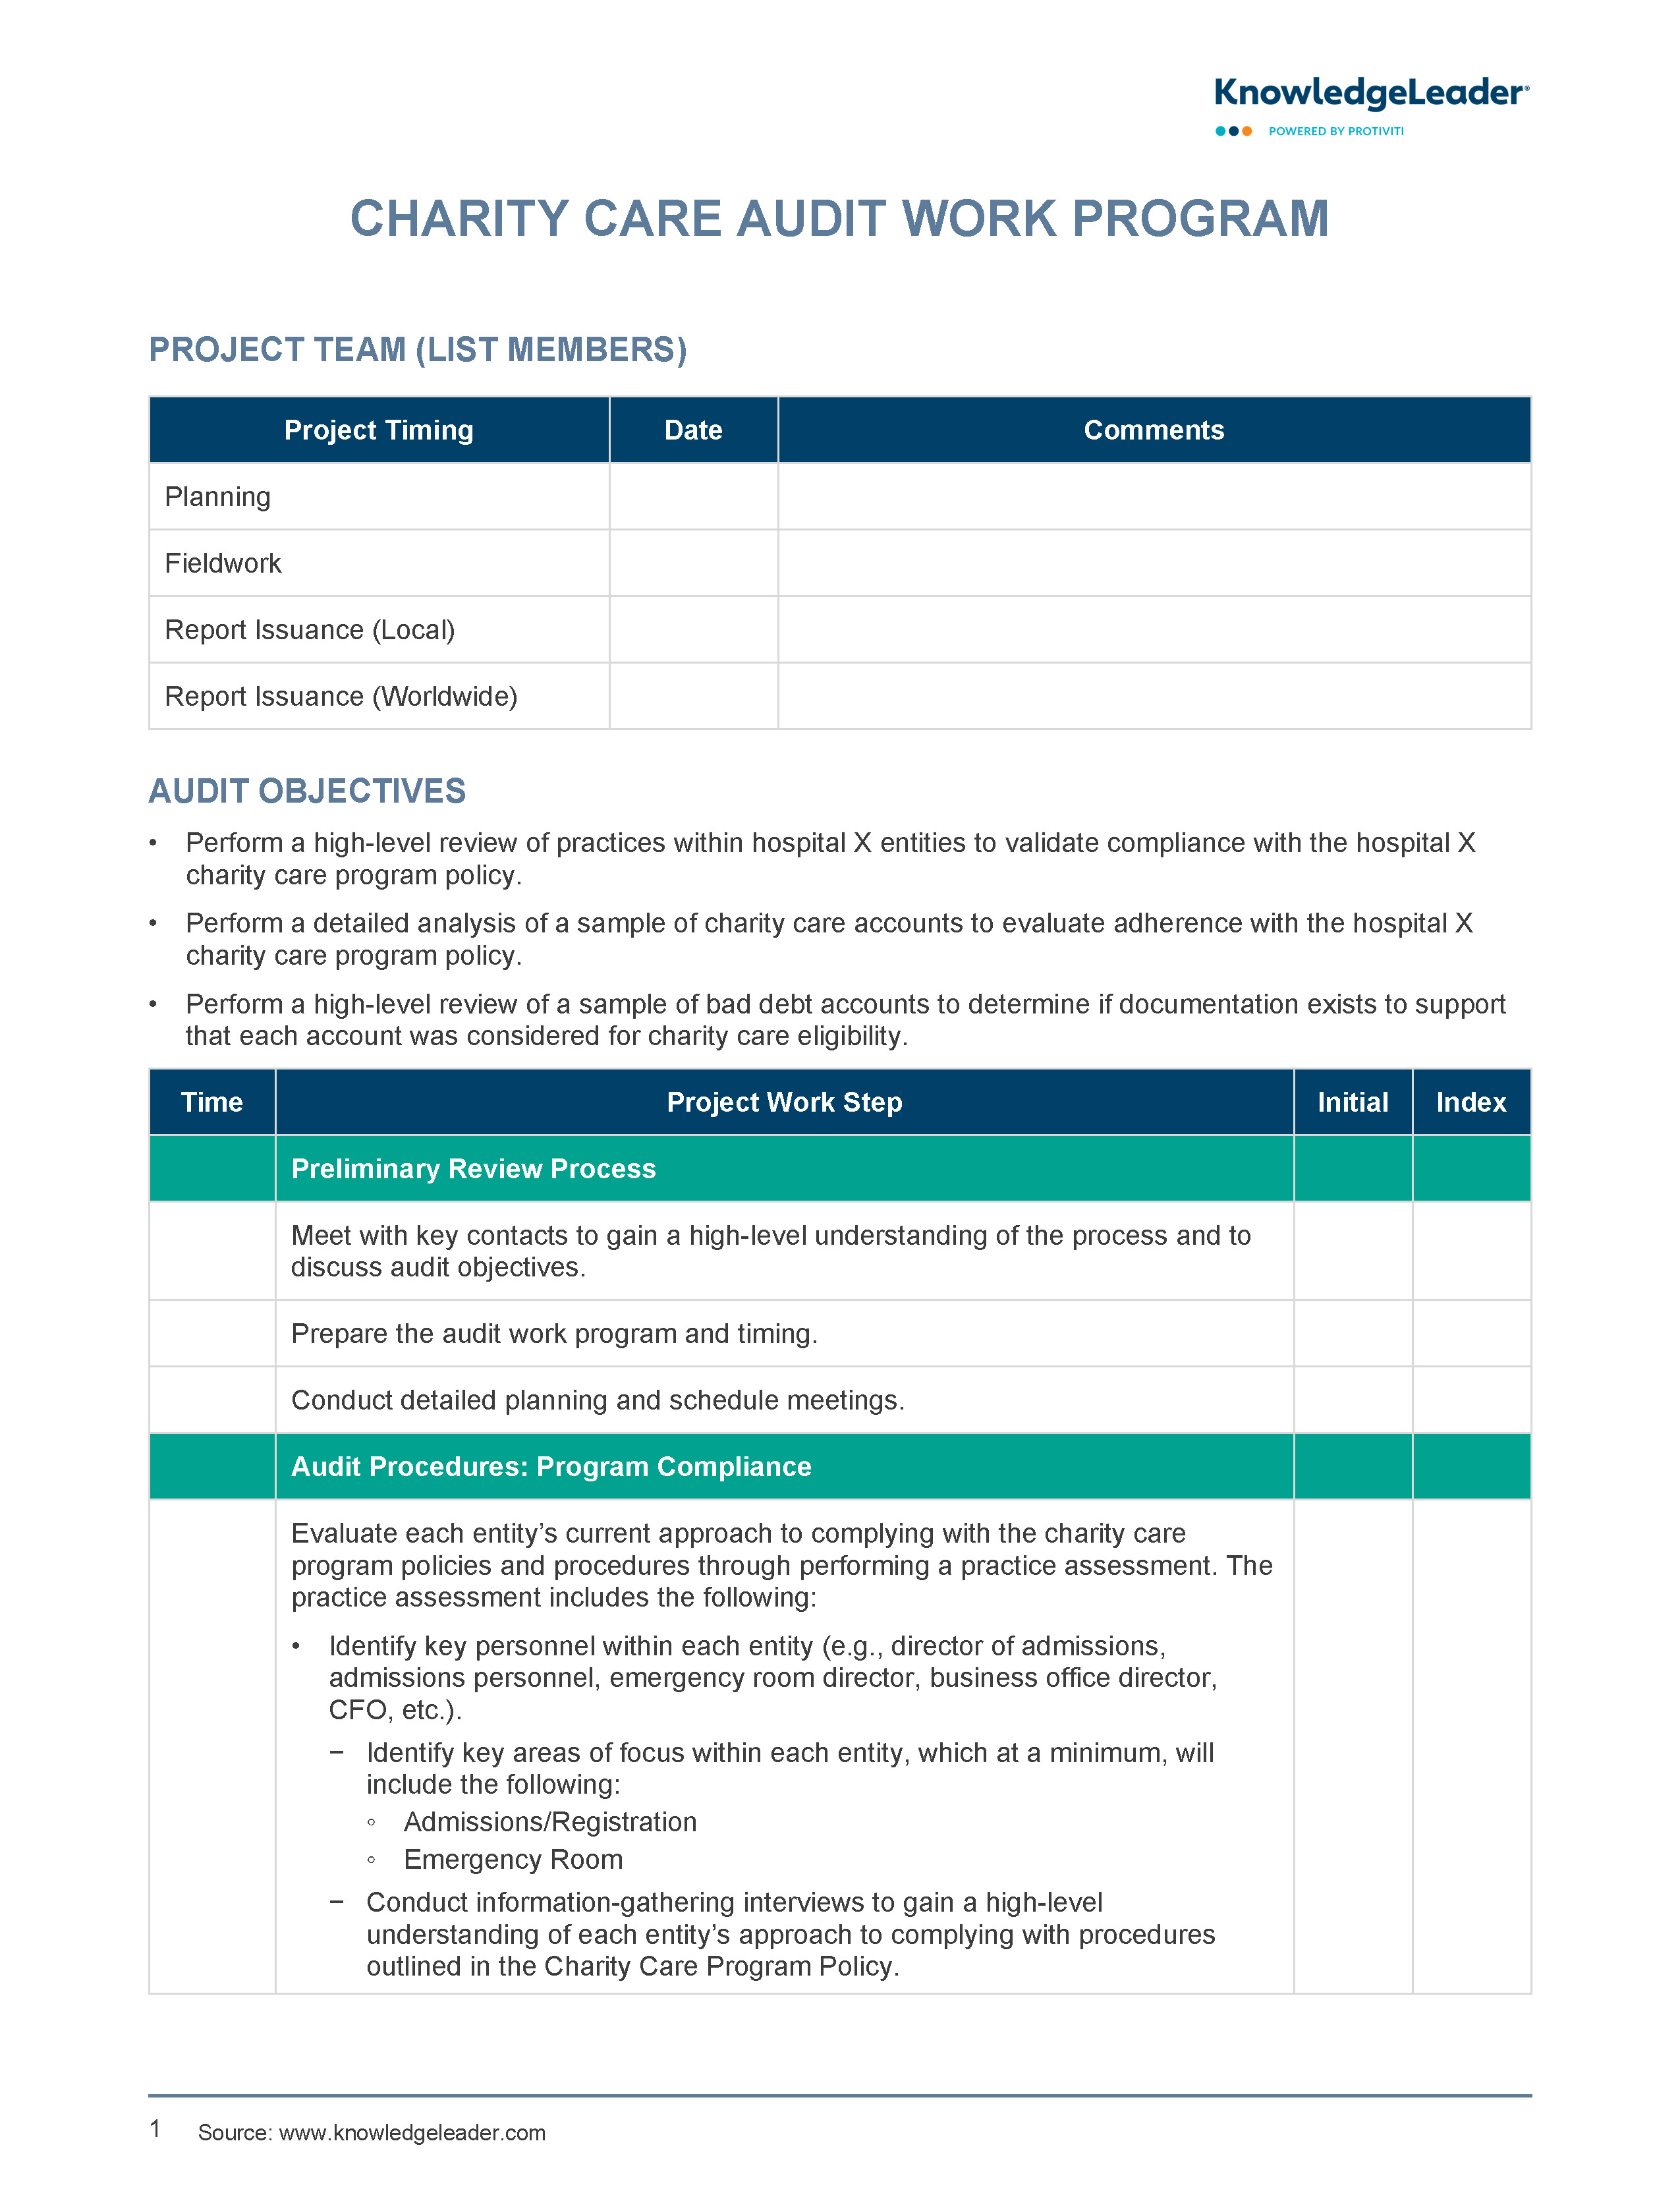 screenshot of the first page of Charity Care Audit Work Program